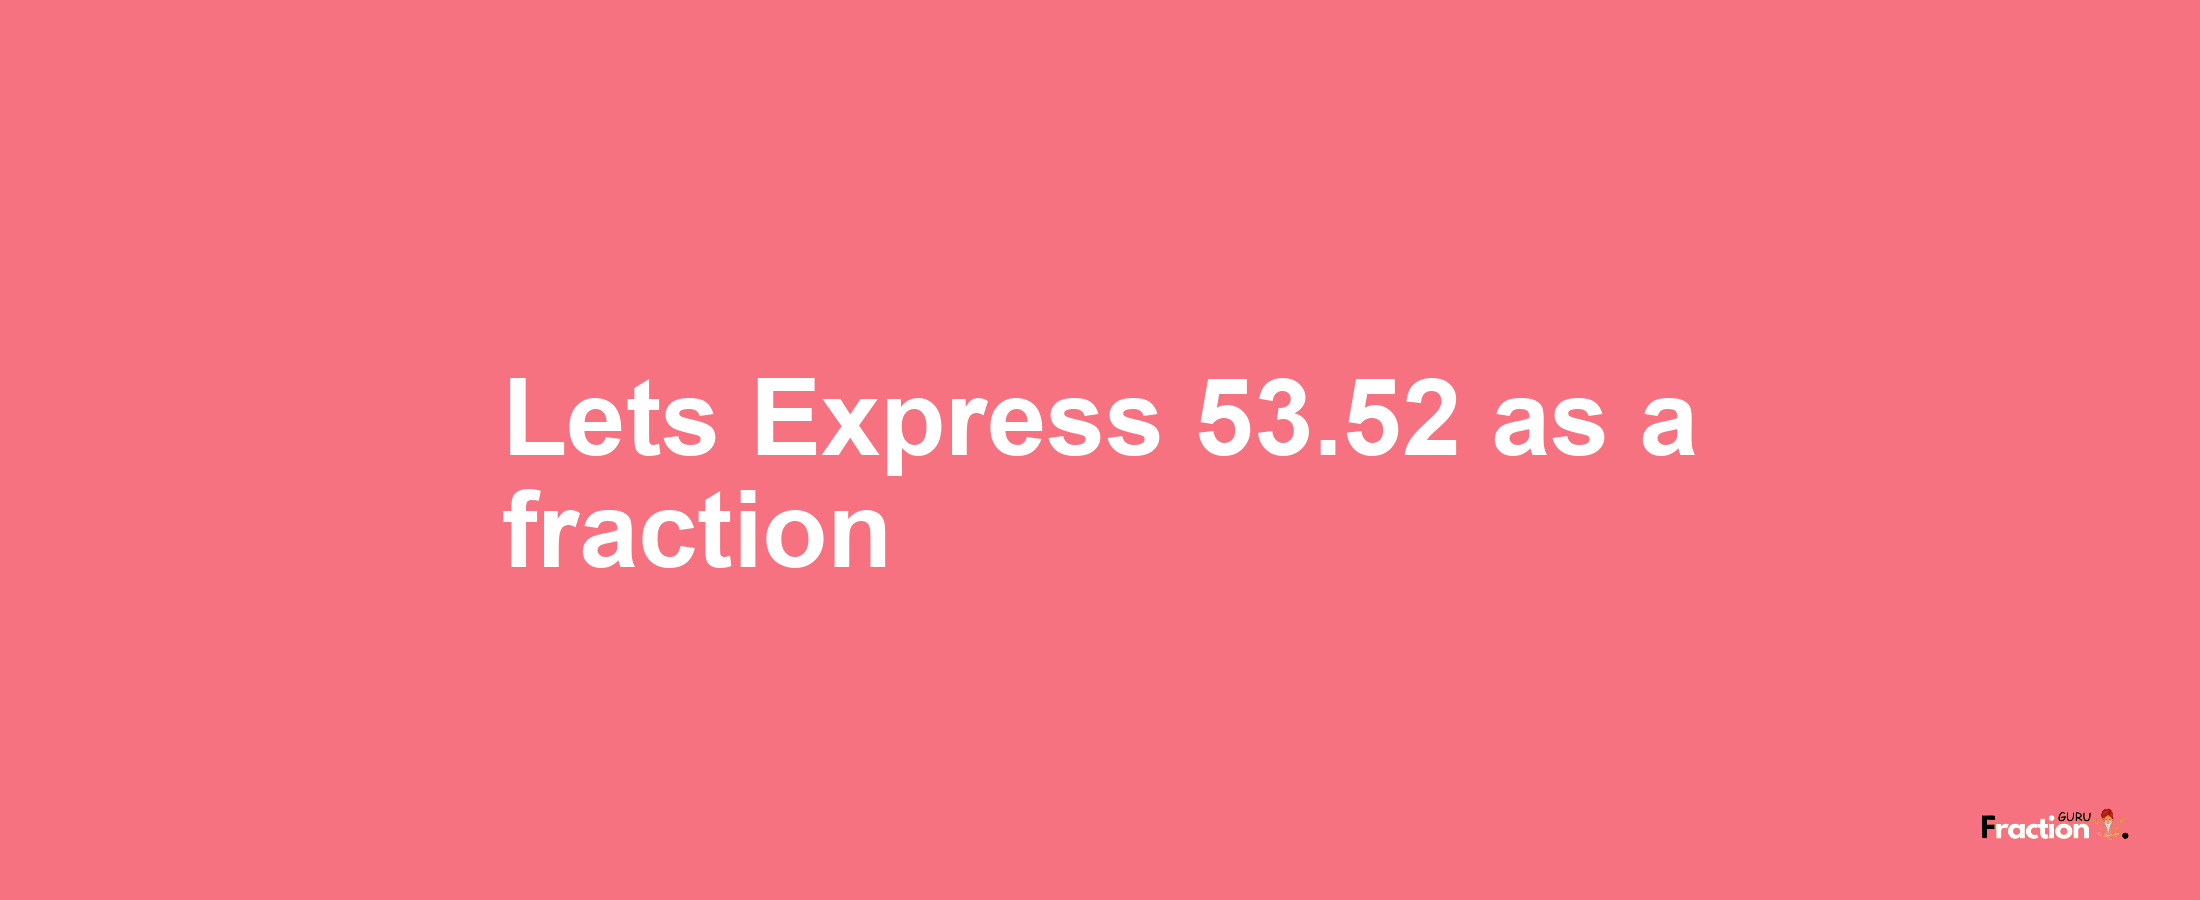 Lets Express 53.52 as afraction